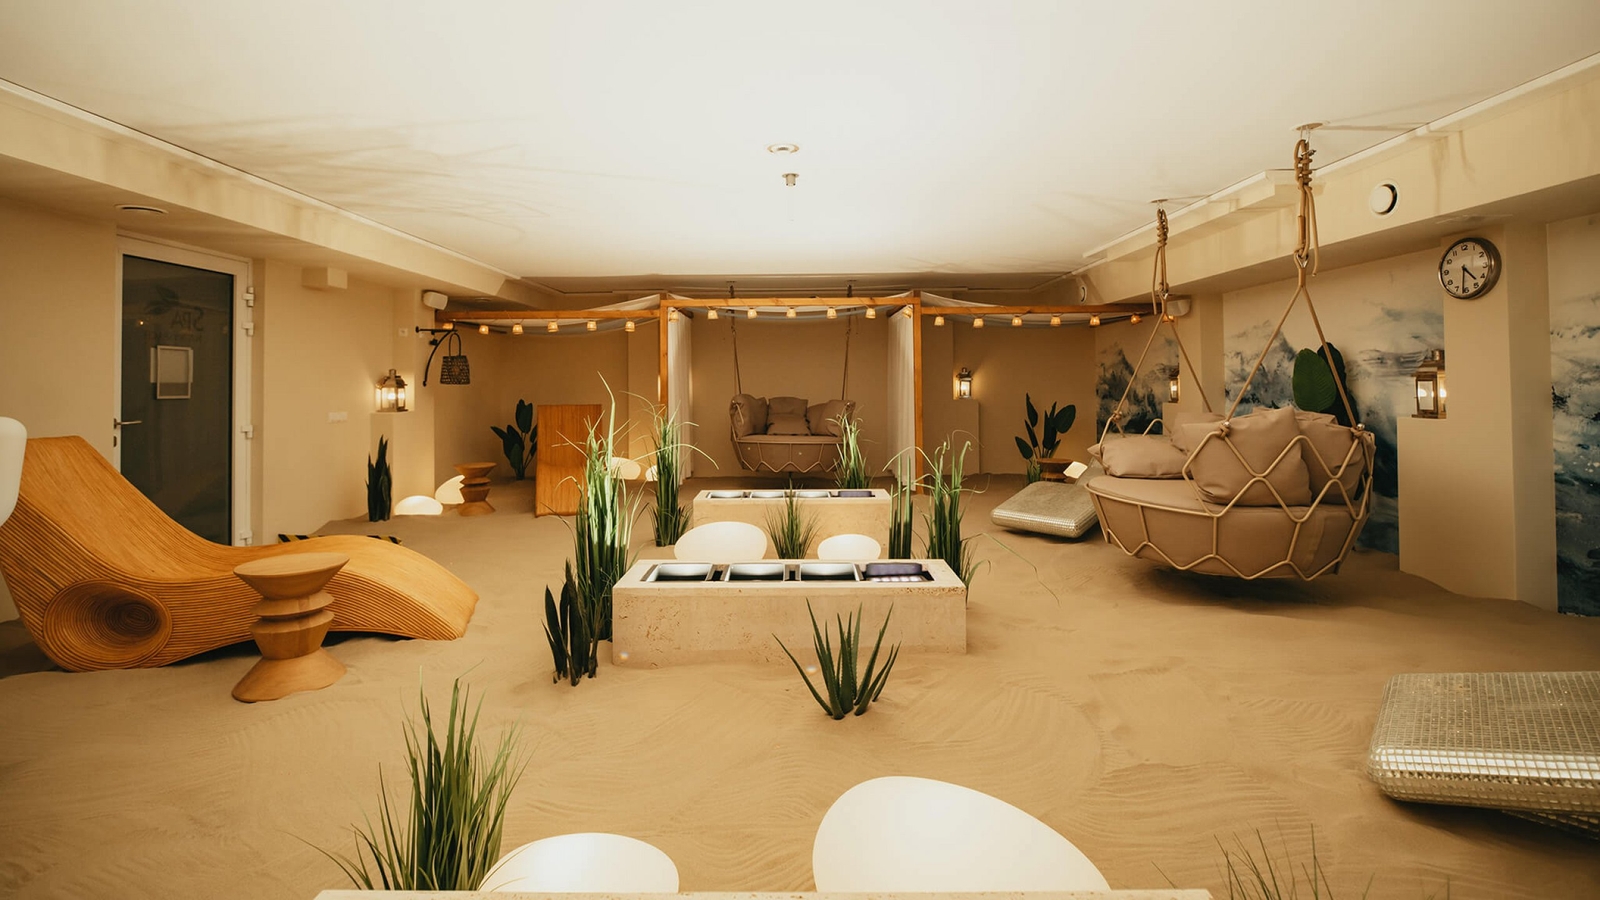 Cacooning Relaxing Room of Vitamin D - News Article | Atollon - a design company